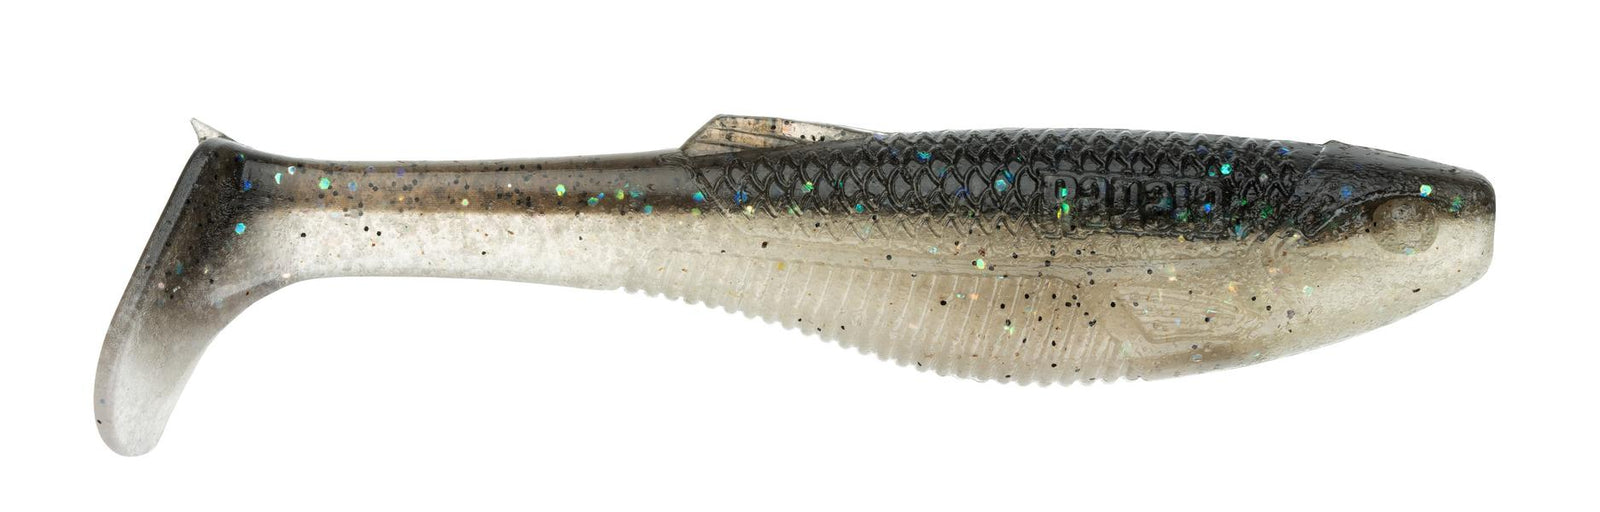 Newest Products Tagged Swimbait - LOTWSHQ